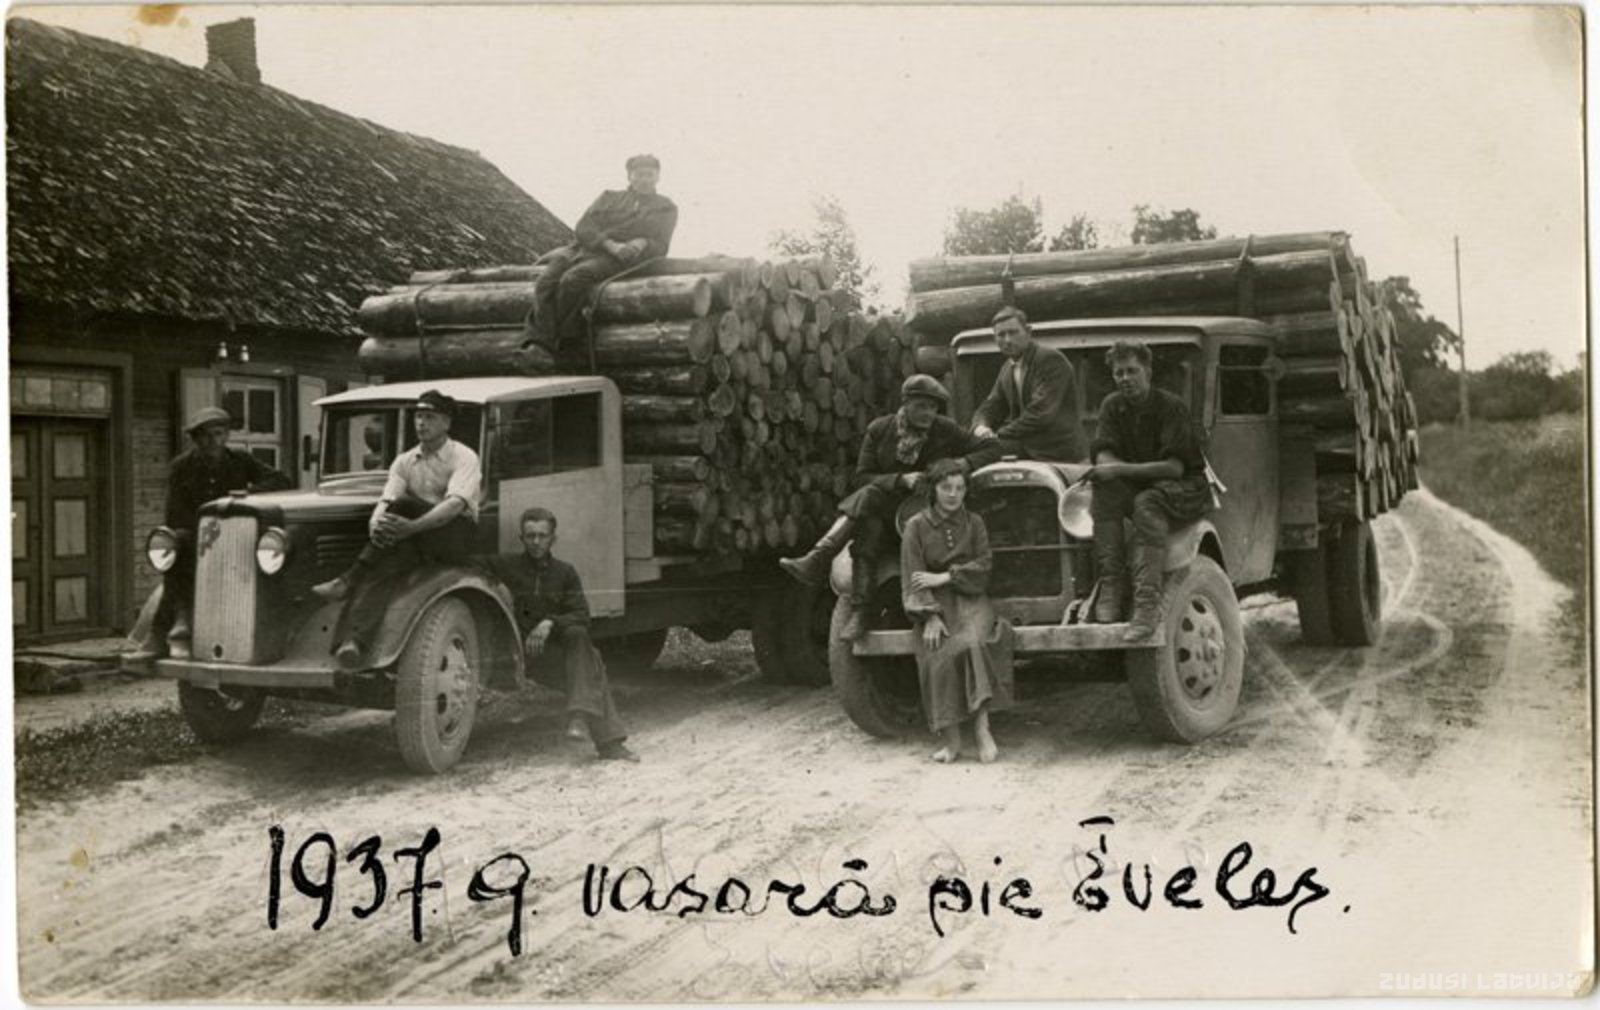 Date after writing to the photo: "In the summer of 1937 at Ēveles"